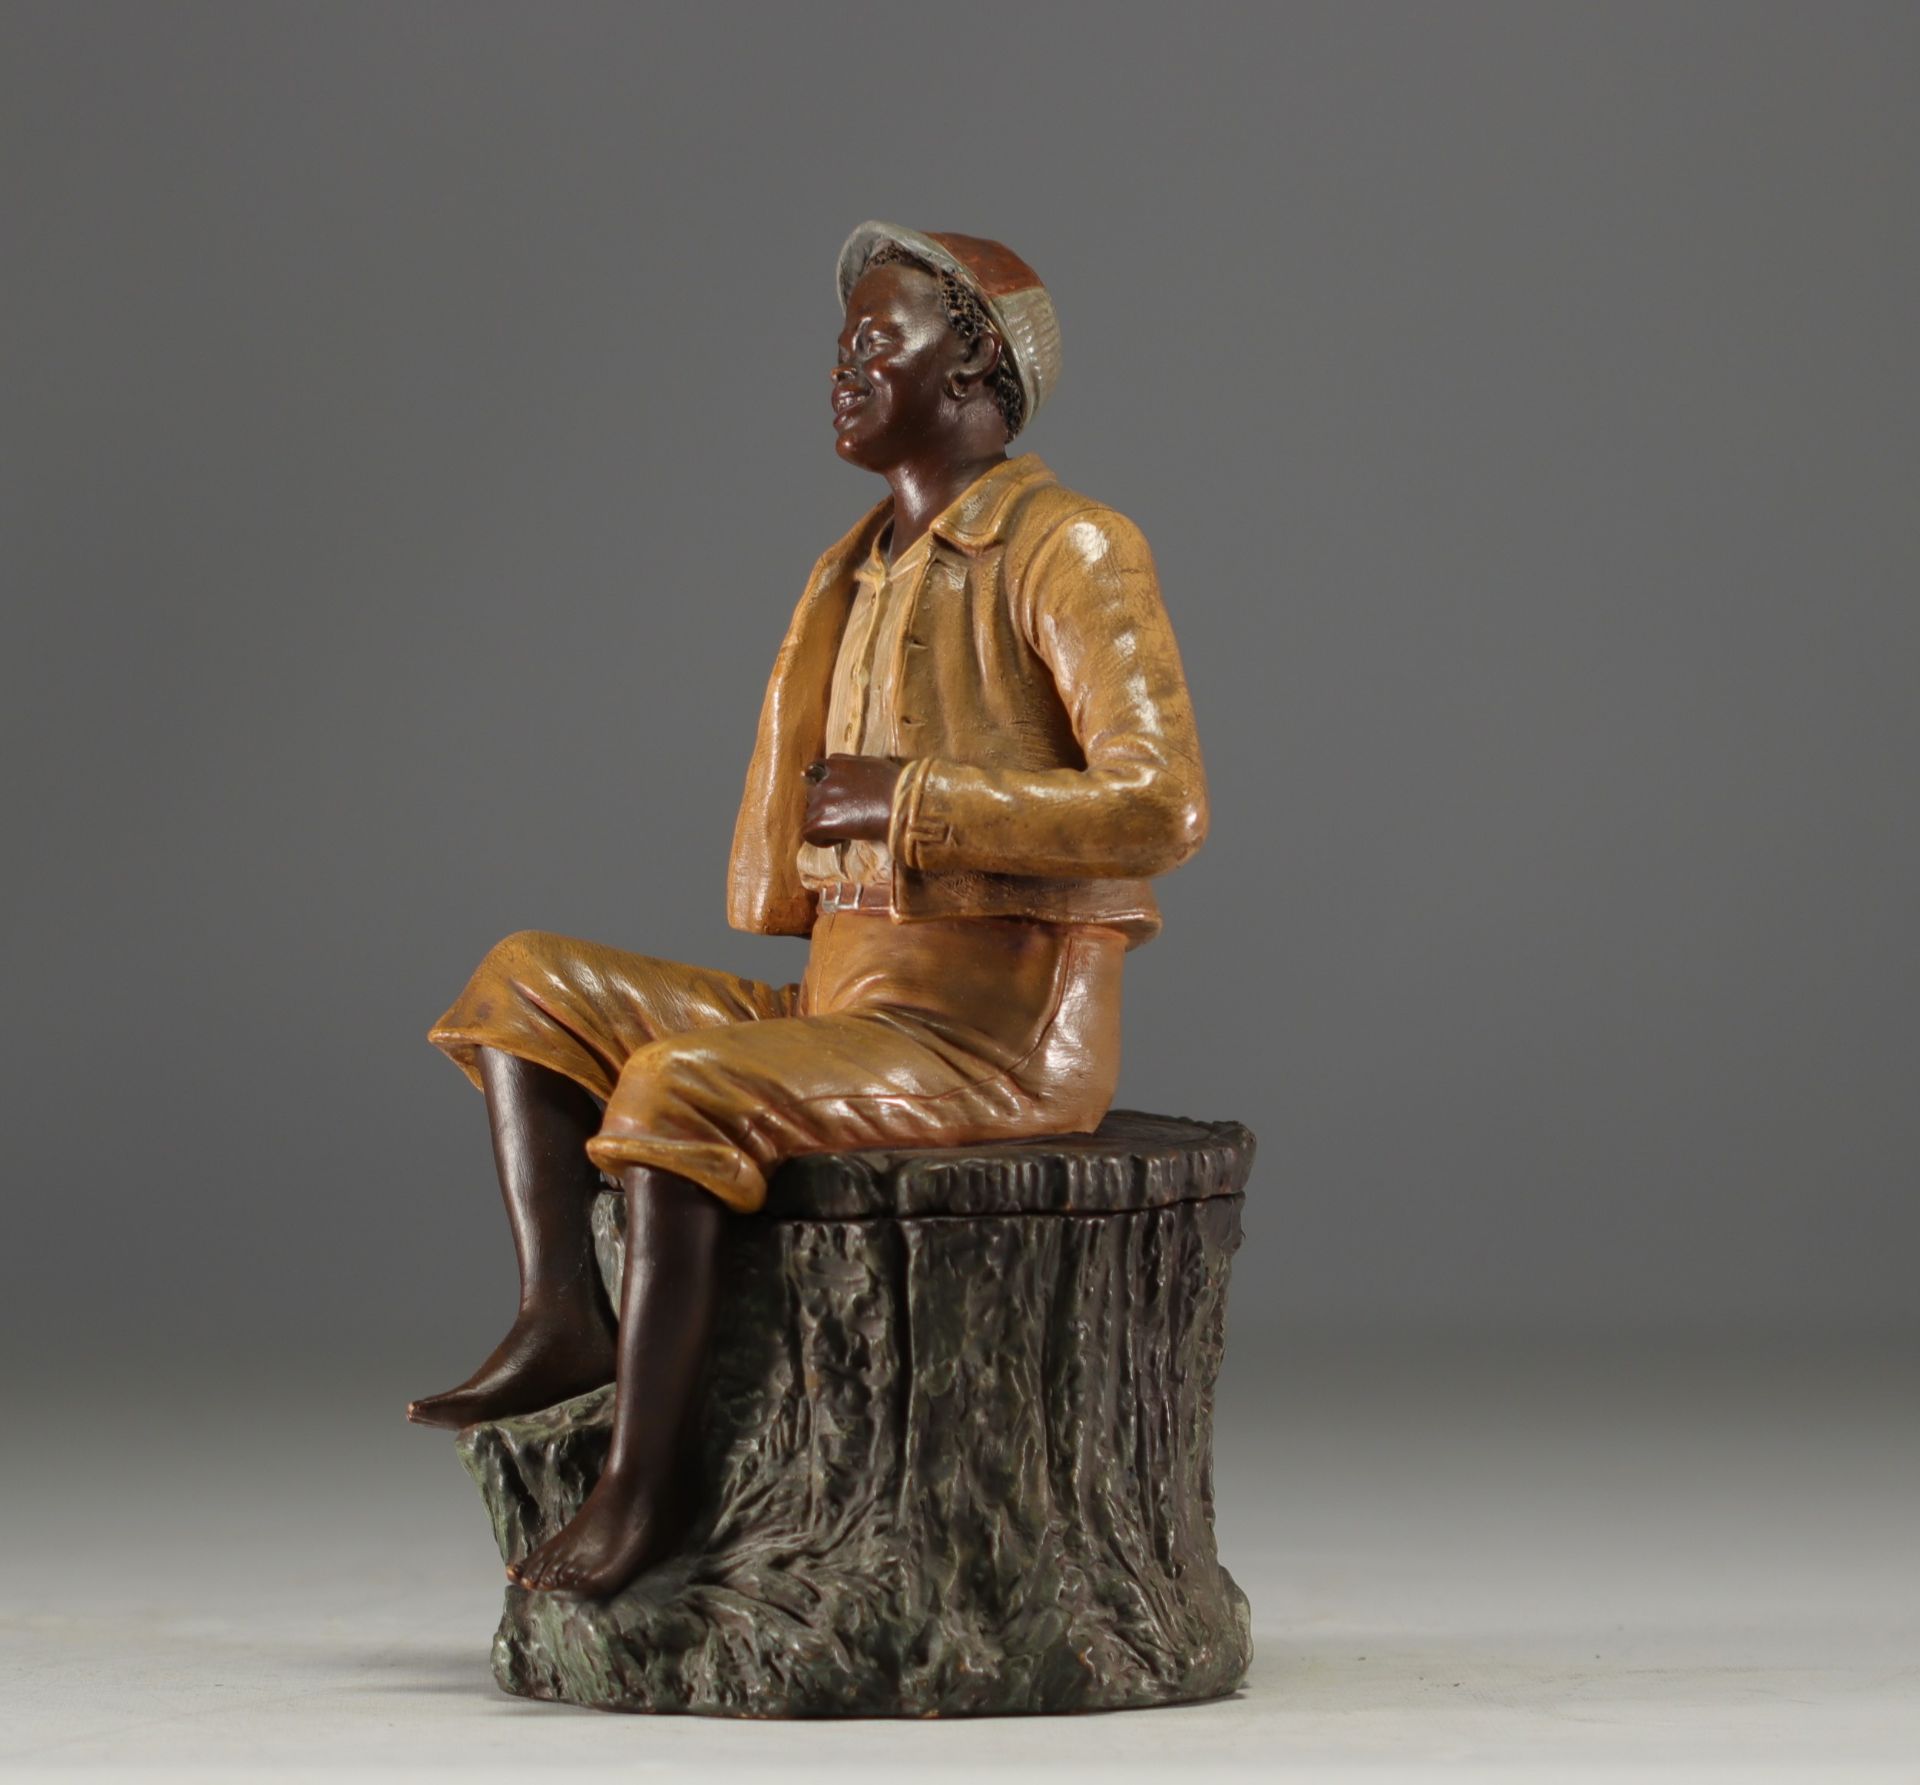 Bernhard BLOCH (1836-1909) "Young African with cigar" Beautiful polychrome terracotta tobacco pot. - Image 3 of 4